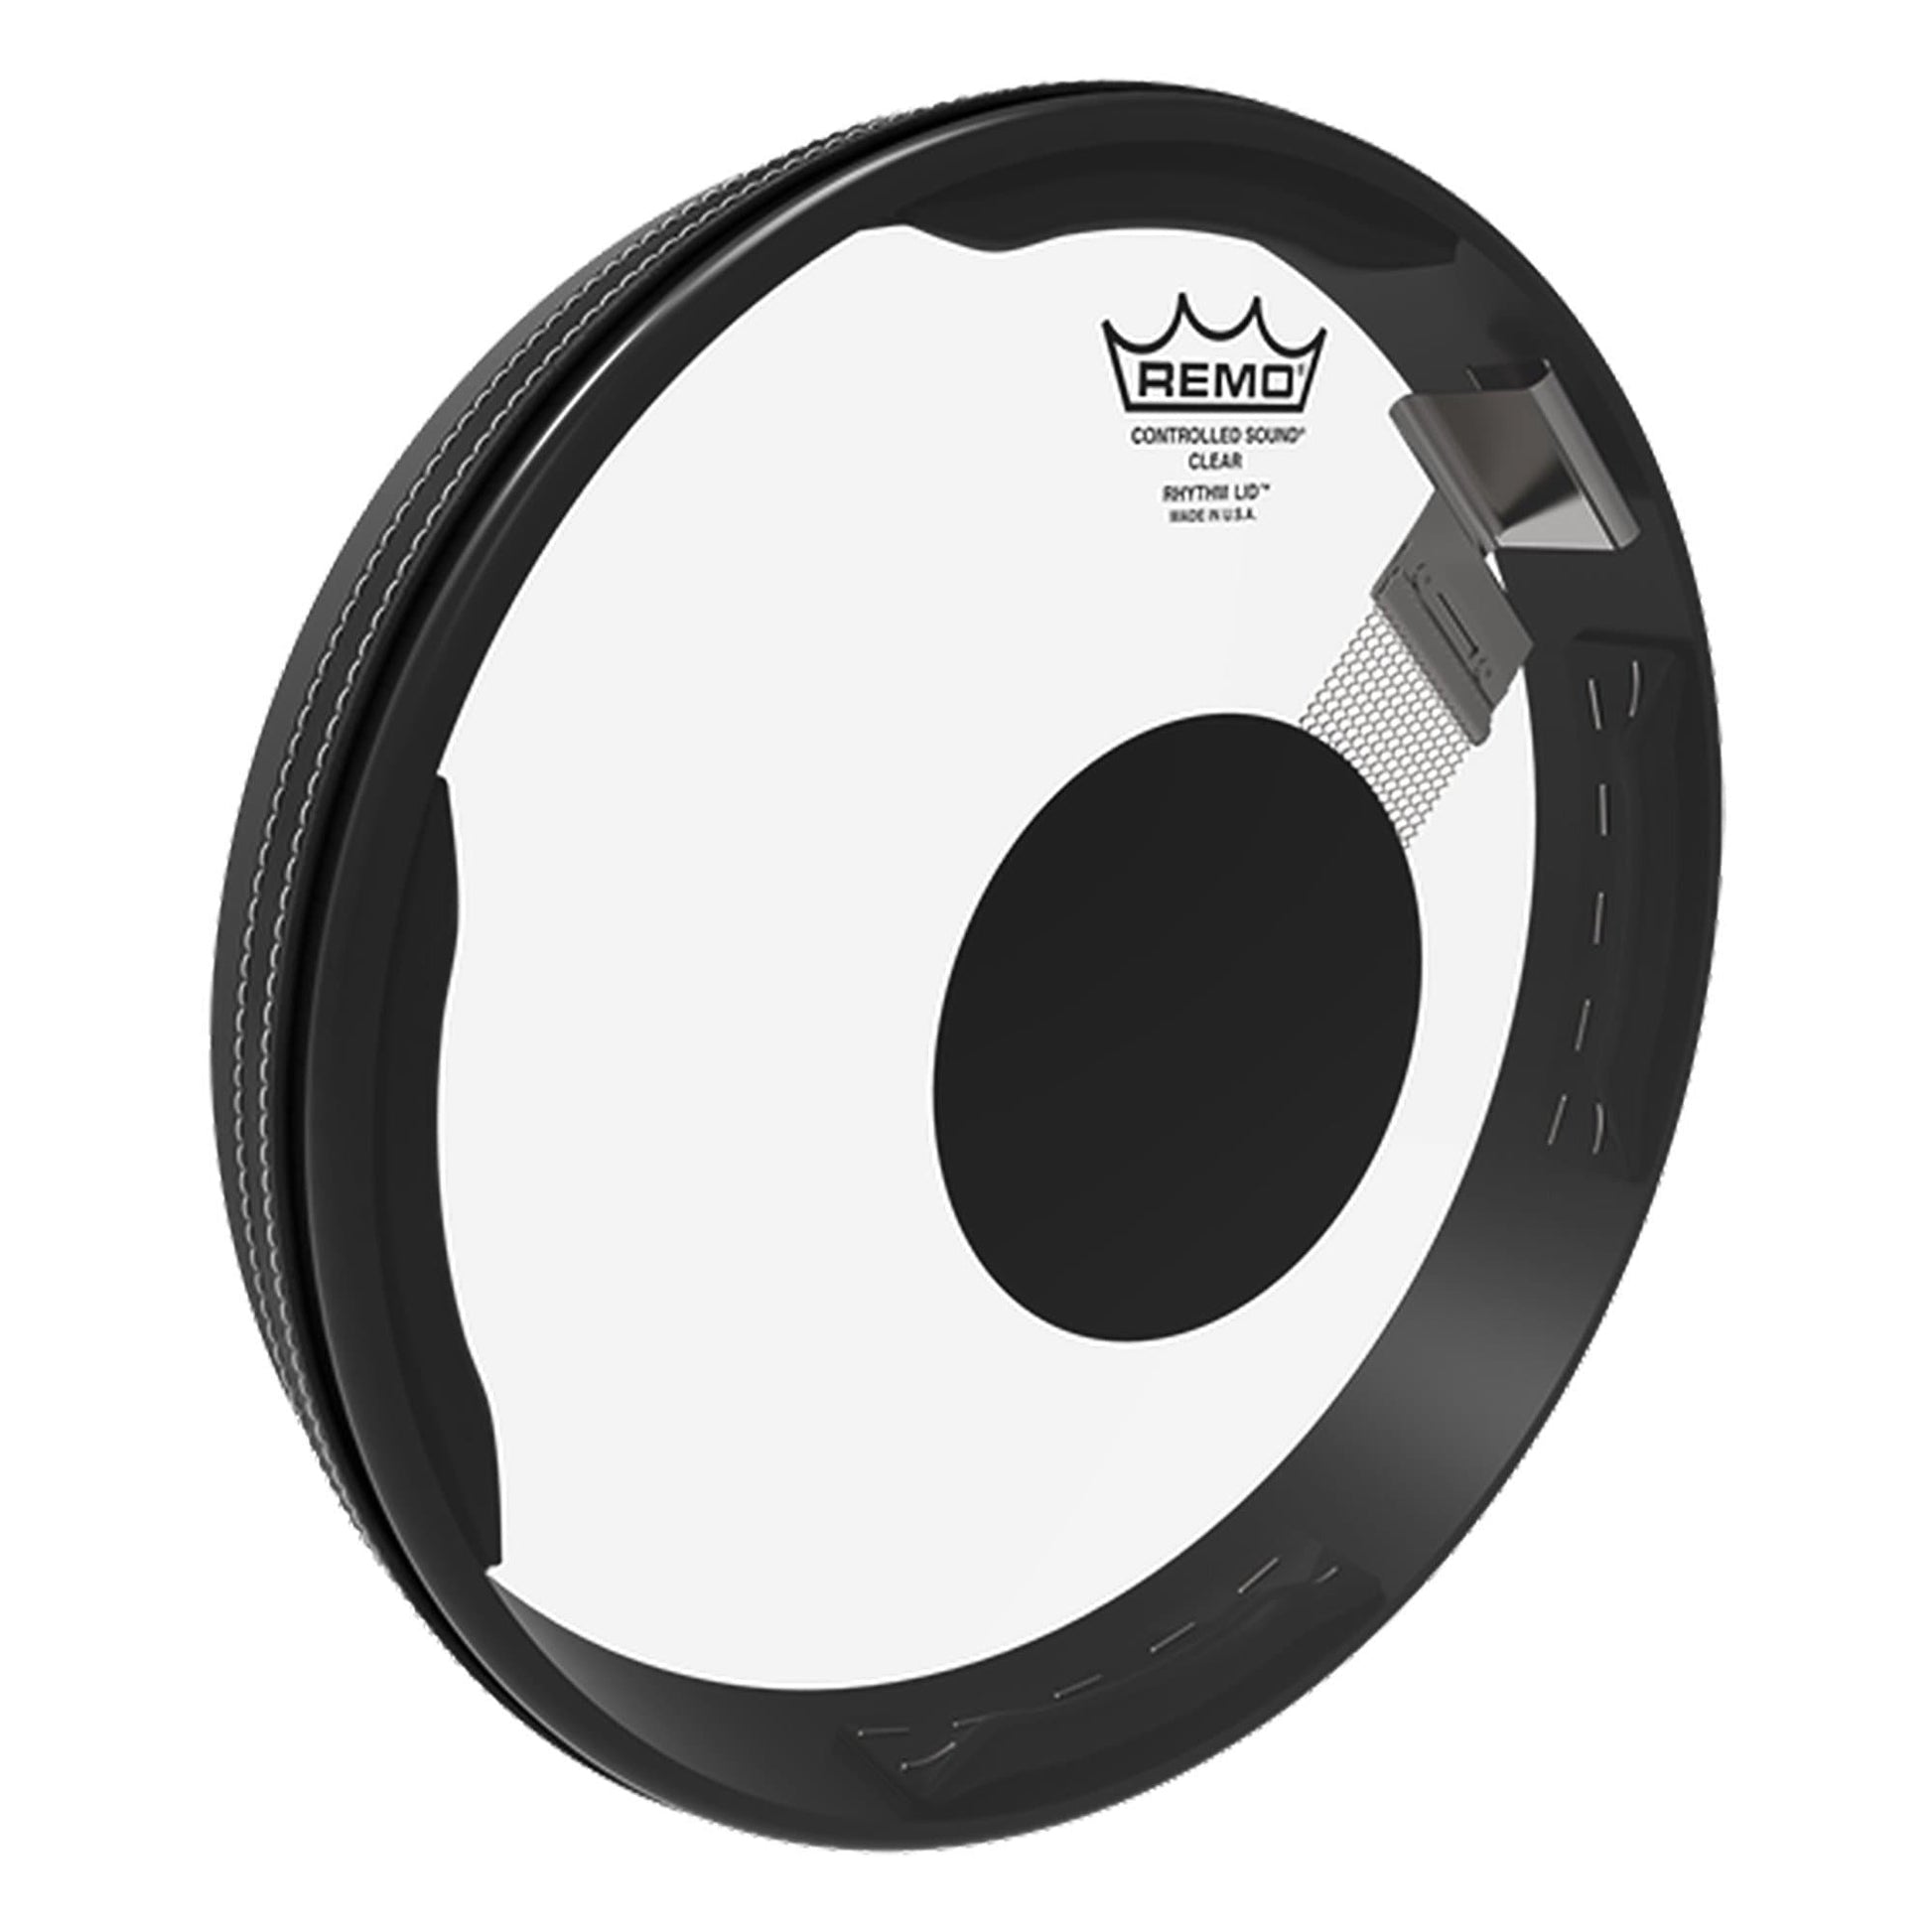 Remo 13" x 1.5" Drumhead Rhythm Lid Snare Kit Controlled Sound Clear Black Dot On Top Drums and Percussion / Parts and Accessories / Heads